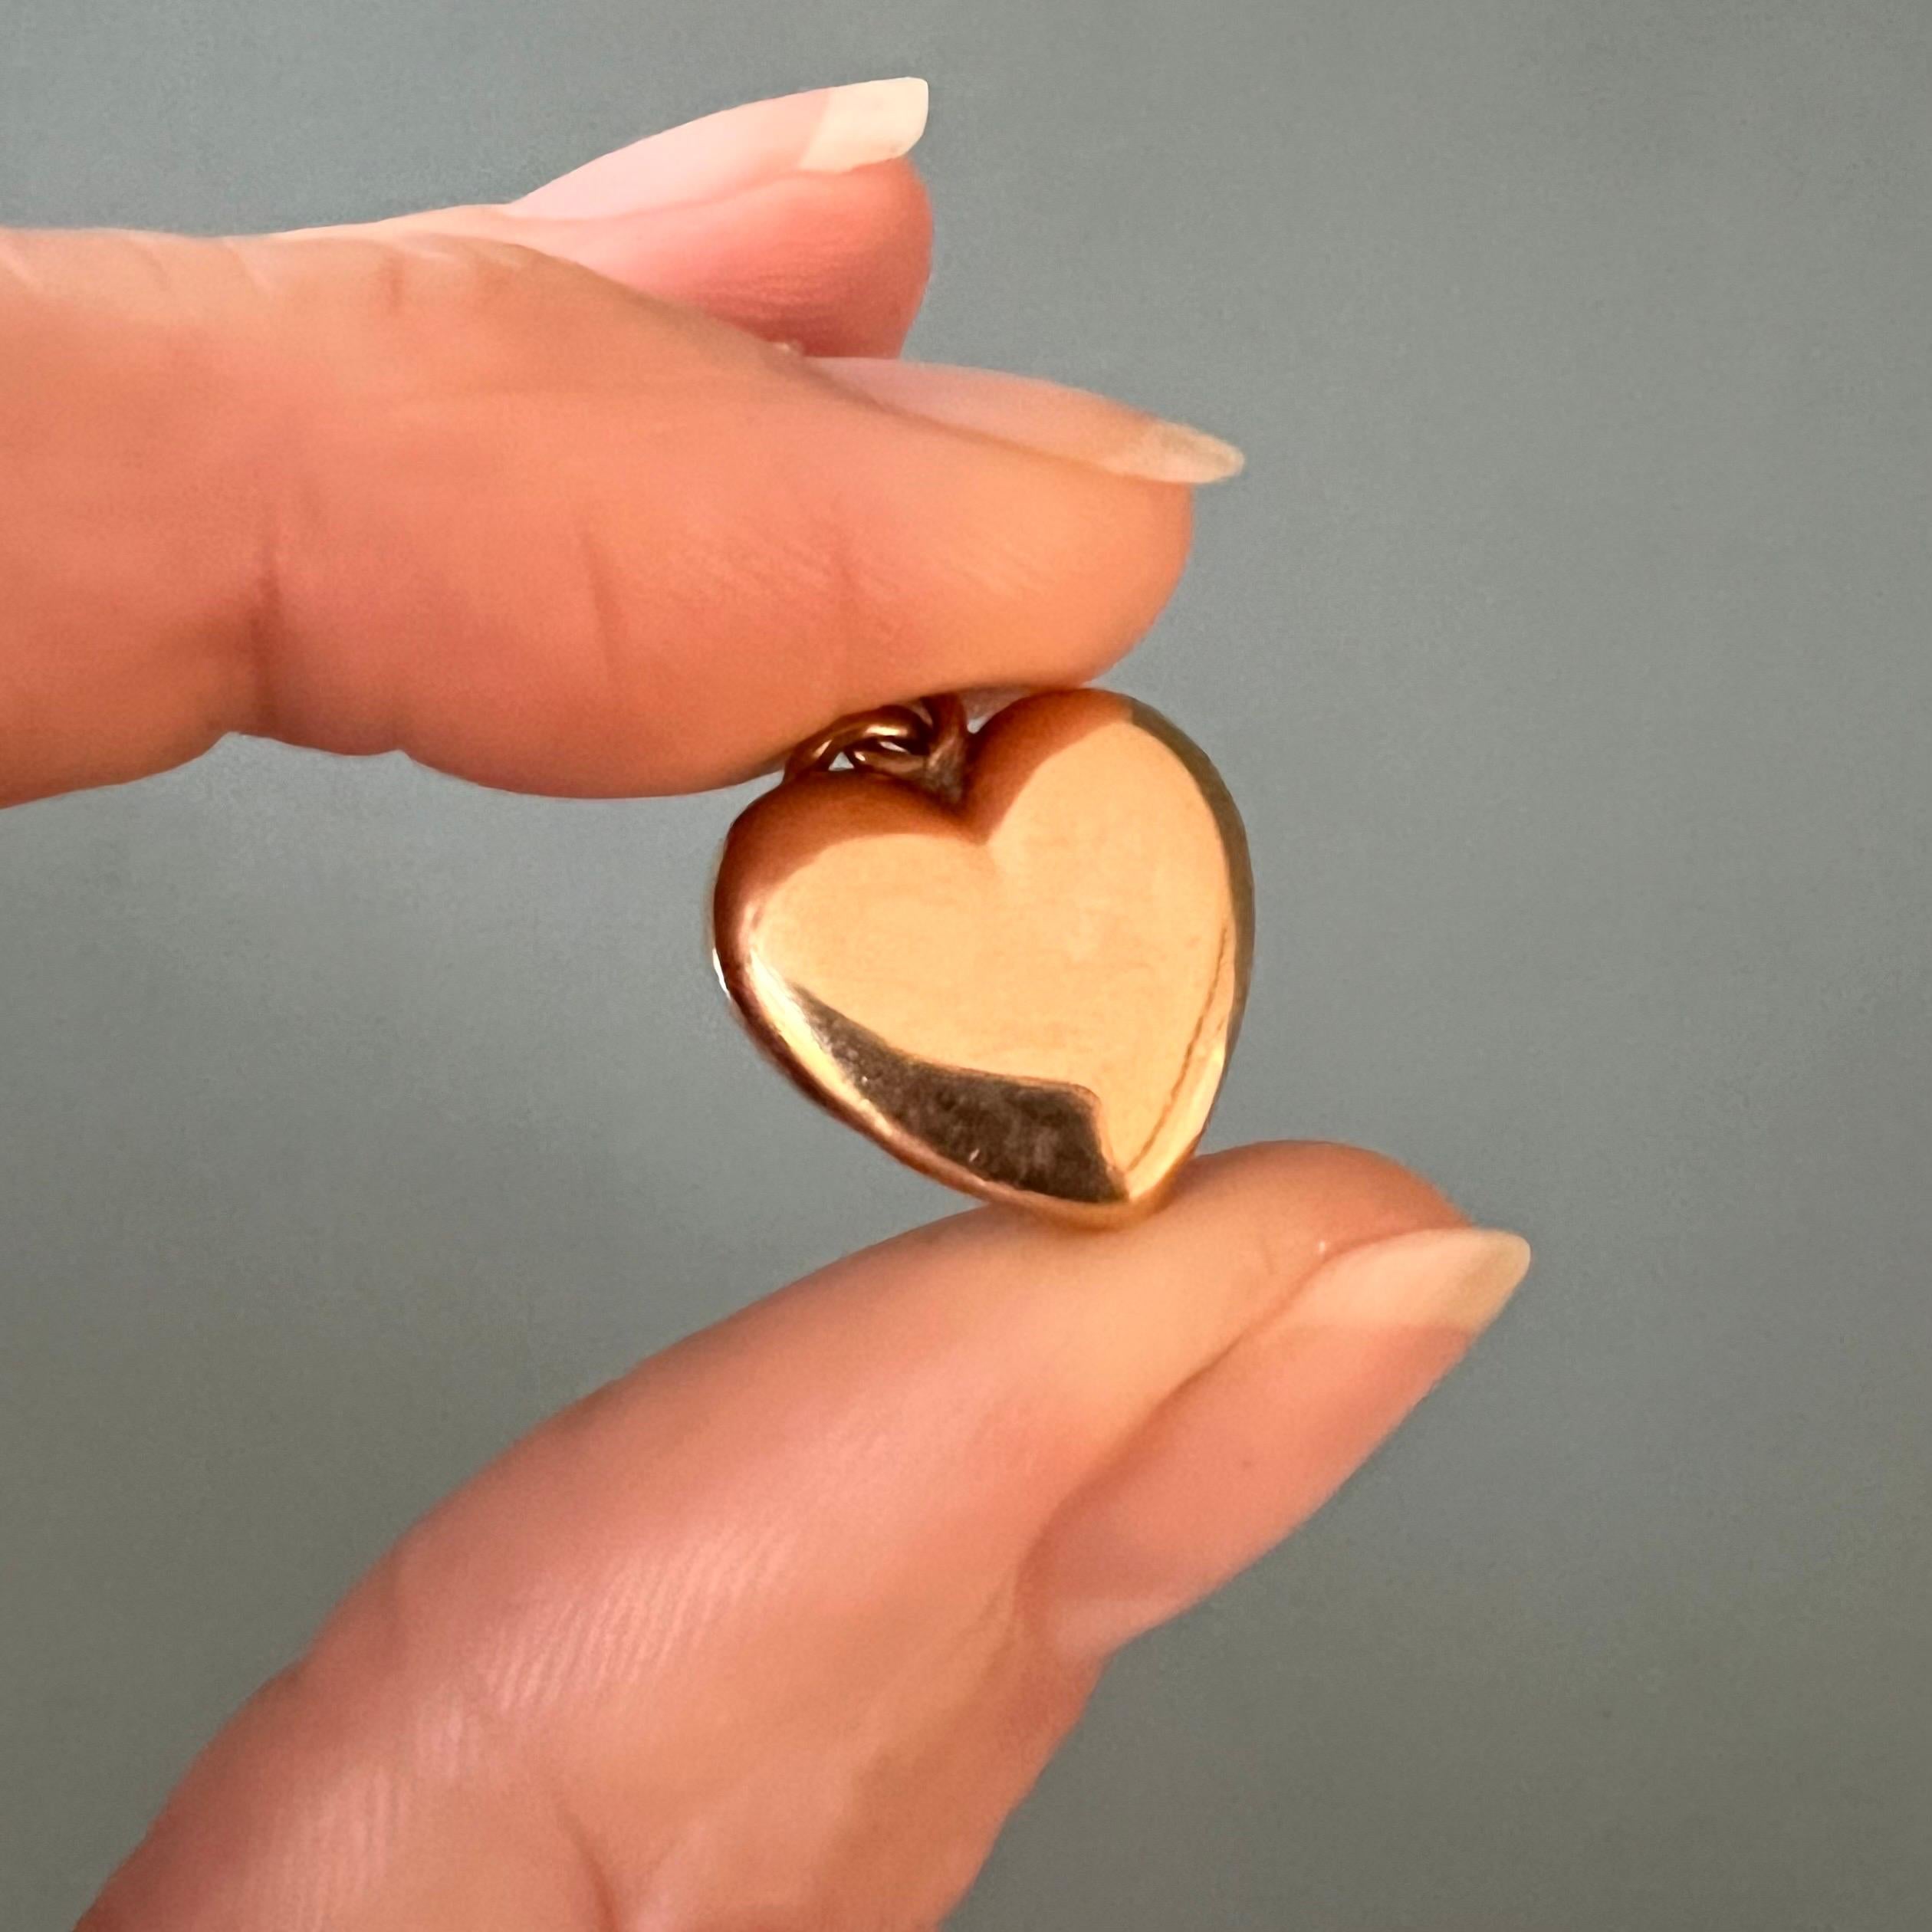 A yellow gold vintage heart charm pendant. This beautiful heart is created in 18 karat gold and smoothly polished on both sides. 

Charms are wearable memories, it has a symbolic and often a sentimental value. This beautiful detailed